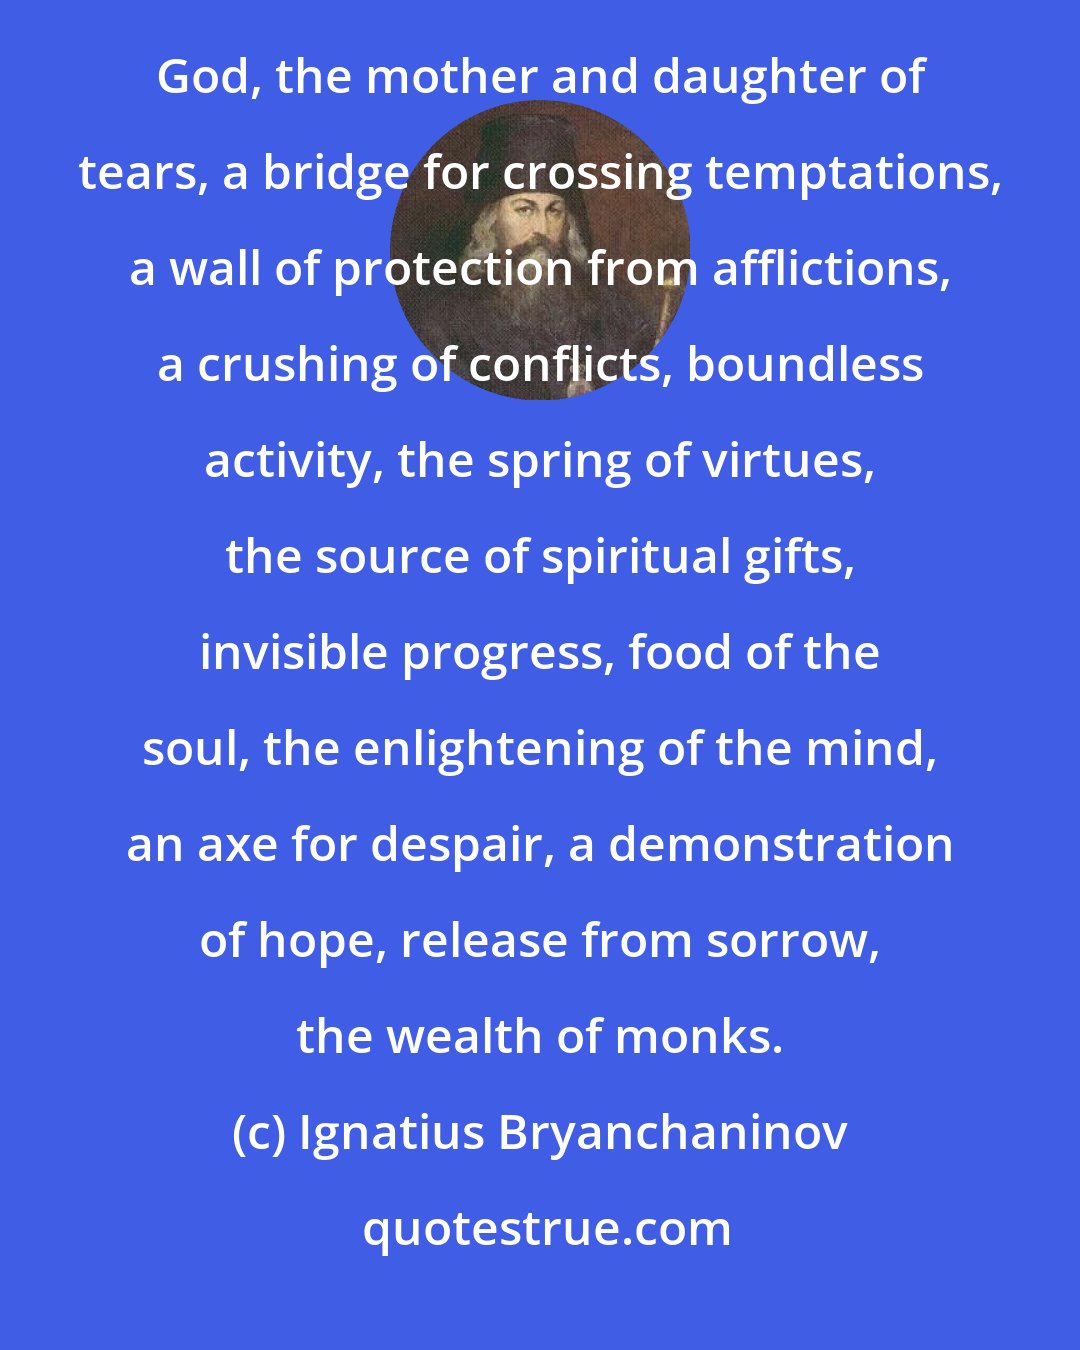 Ignatius Bryanchaninov: Prayer by its nature is communion and union of man with God; by its action it is the reconciliation of man with God, the mother and daughter of tears, a bridge for crossing temptations, a wall of protection from afflictions, a crushing of conflicts, boundless activity, the spring of virtues, the source of spiritual gifts, invisible progress, food of the soul, the enlightening of the mind, an axe for despair, a demonstration of hope, release from sorrow, the wealth of monks.